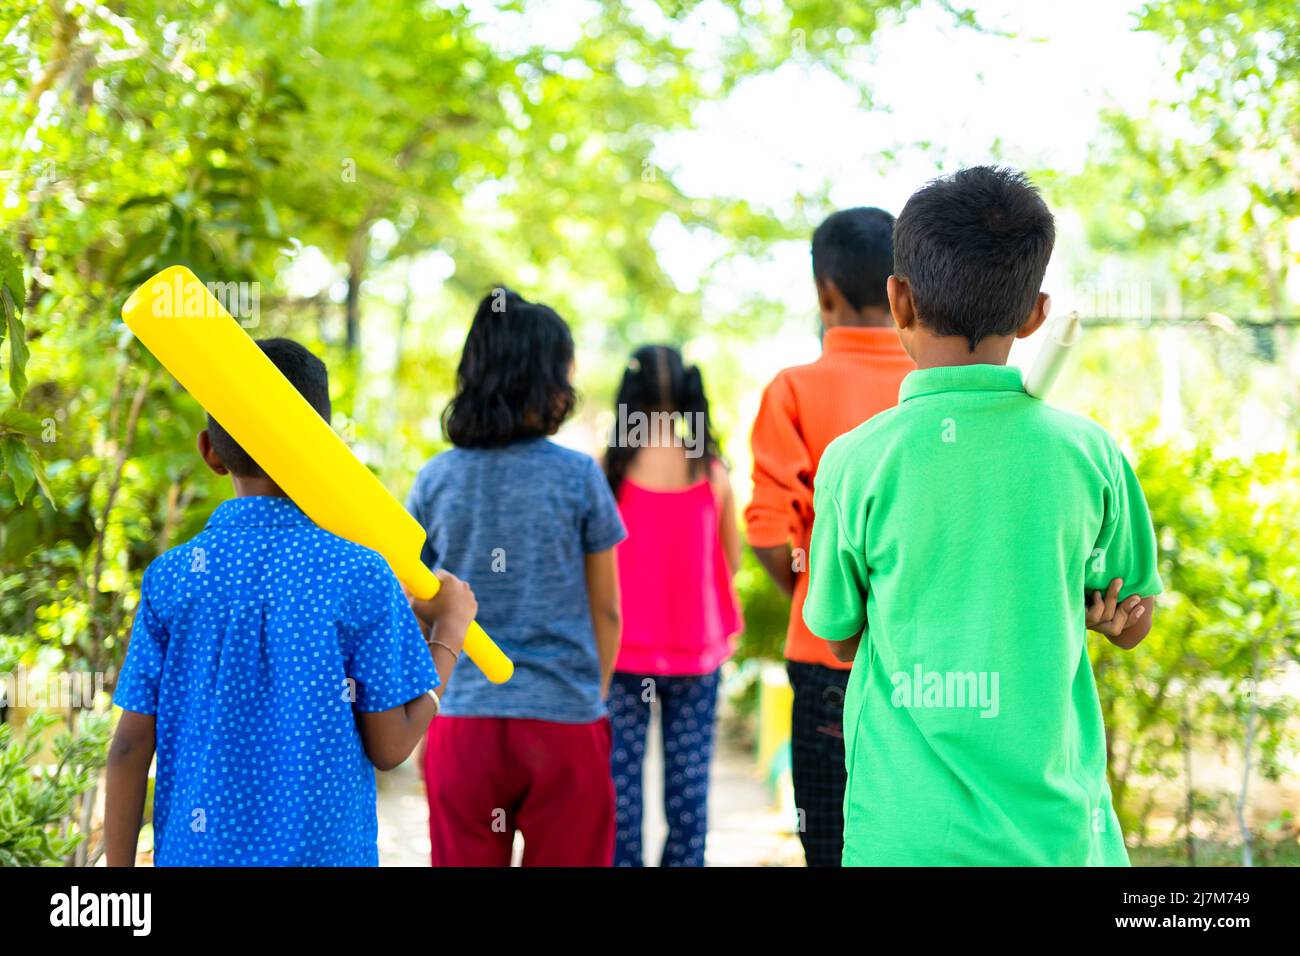 Back view shot of teenager kids going to home after playing cricket game at park - concept of weekend holidays, leisure activities and togetherness Stock Photo